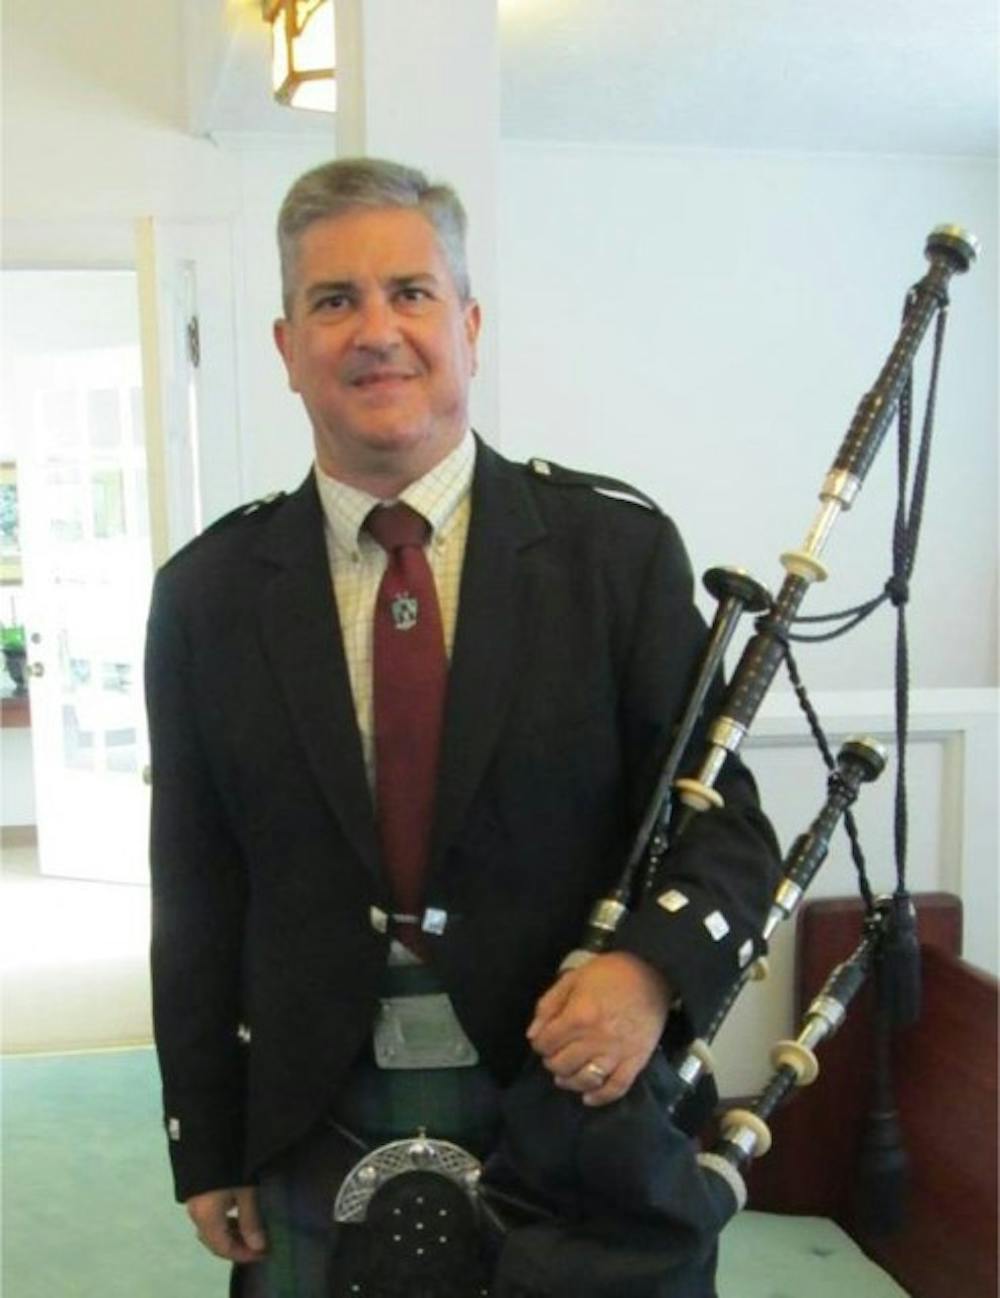 Bill Caudill will be playing the bagpipes at the Tales and Tunes of the Scottish Highlands event on March 23rd.&nbsp;Photo Courtesy of Bill Caudill.